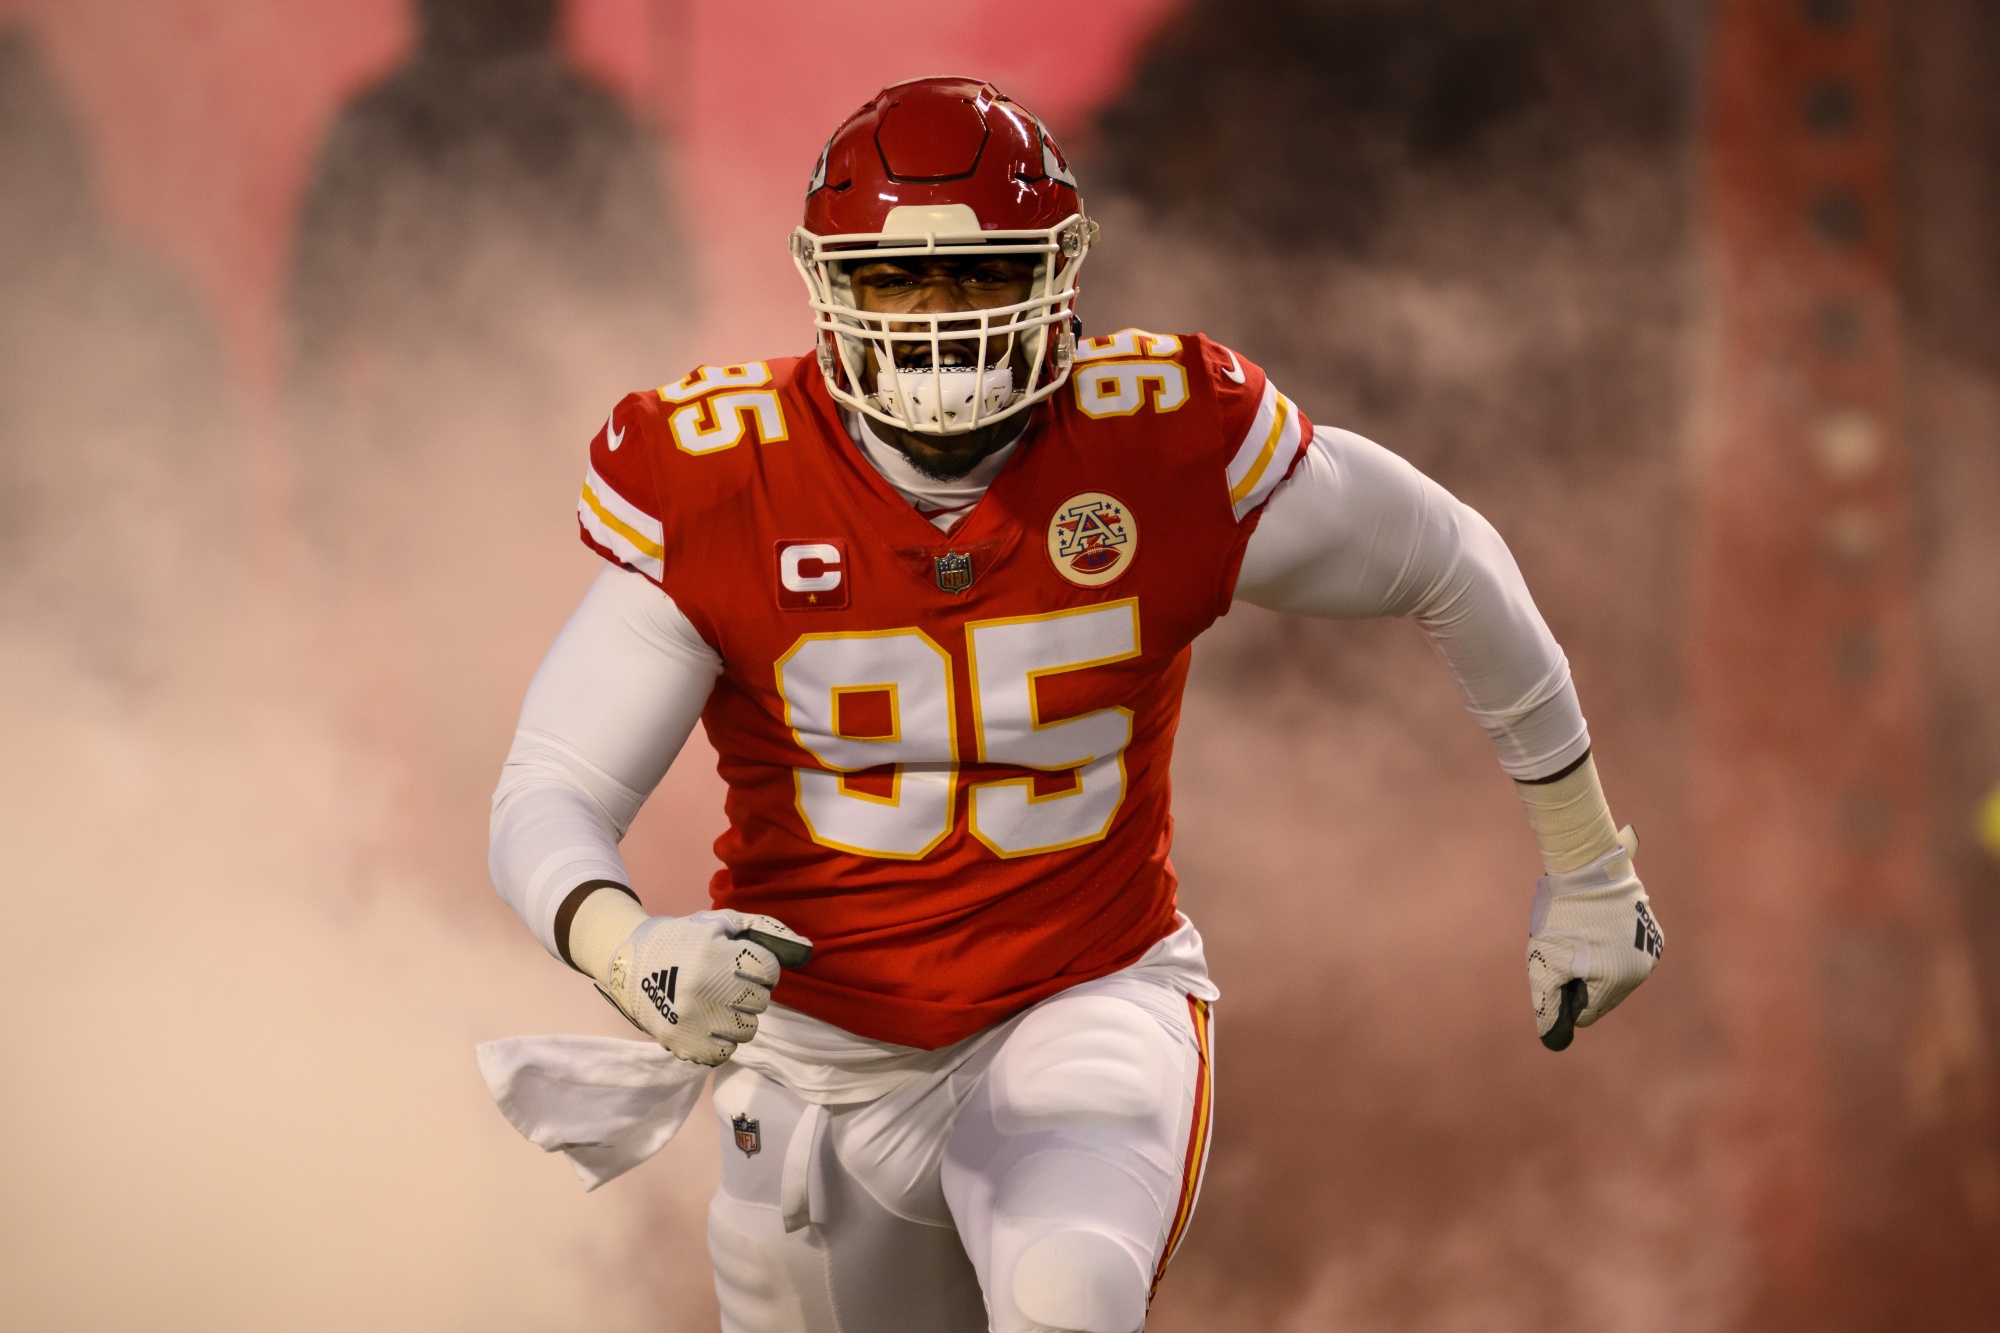 Chris Jones Ascends as the Premier Defensive Force in the NFL